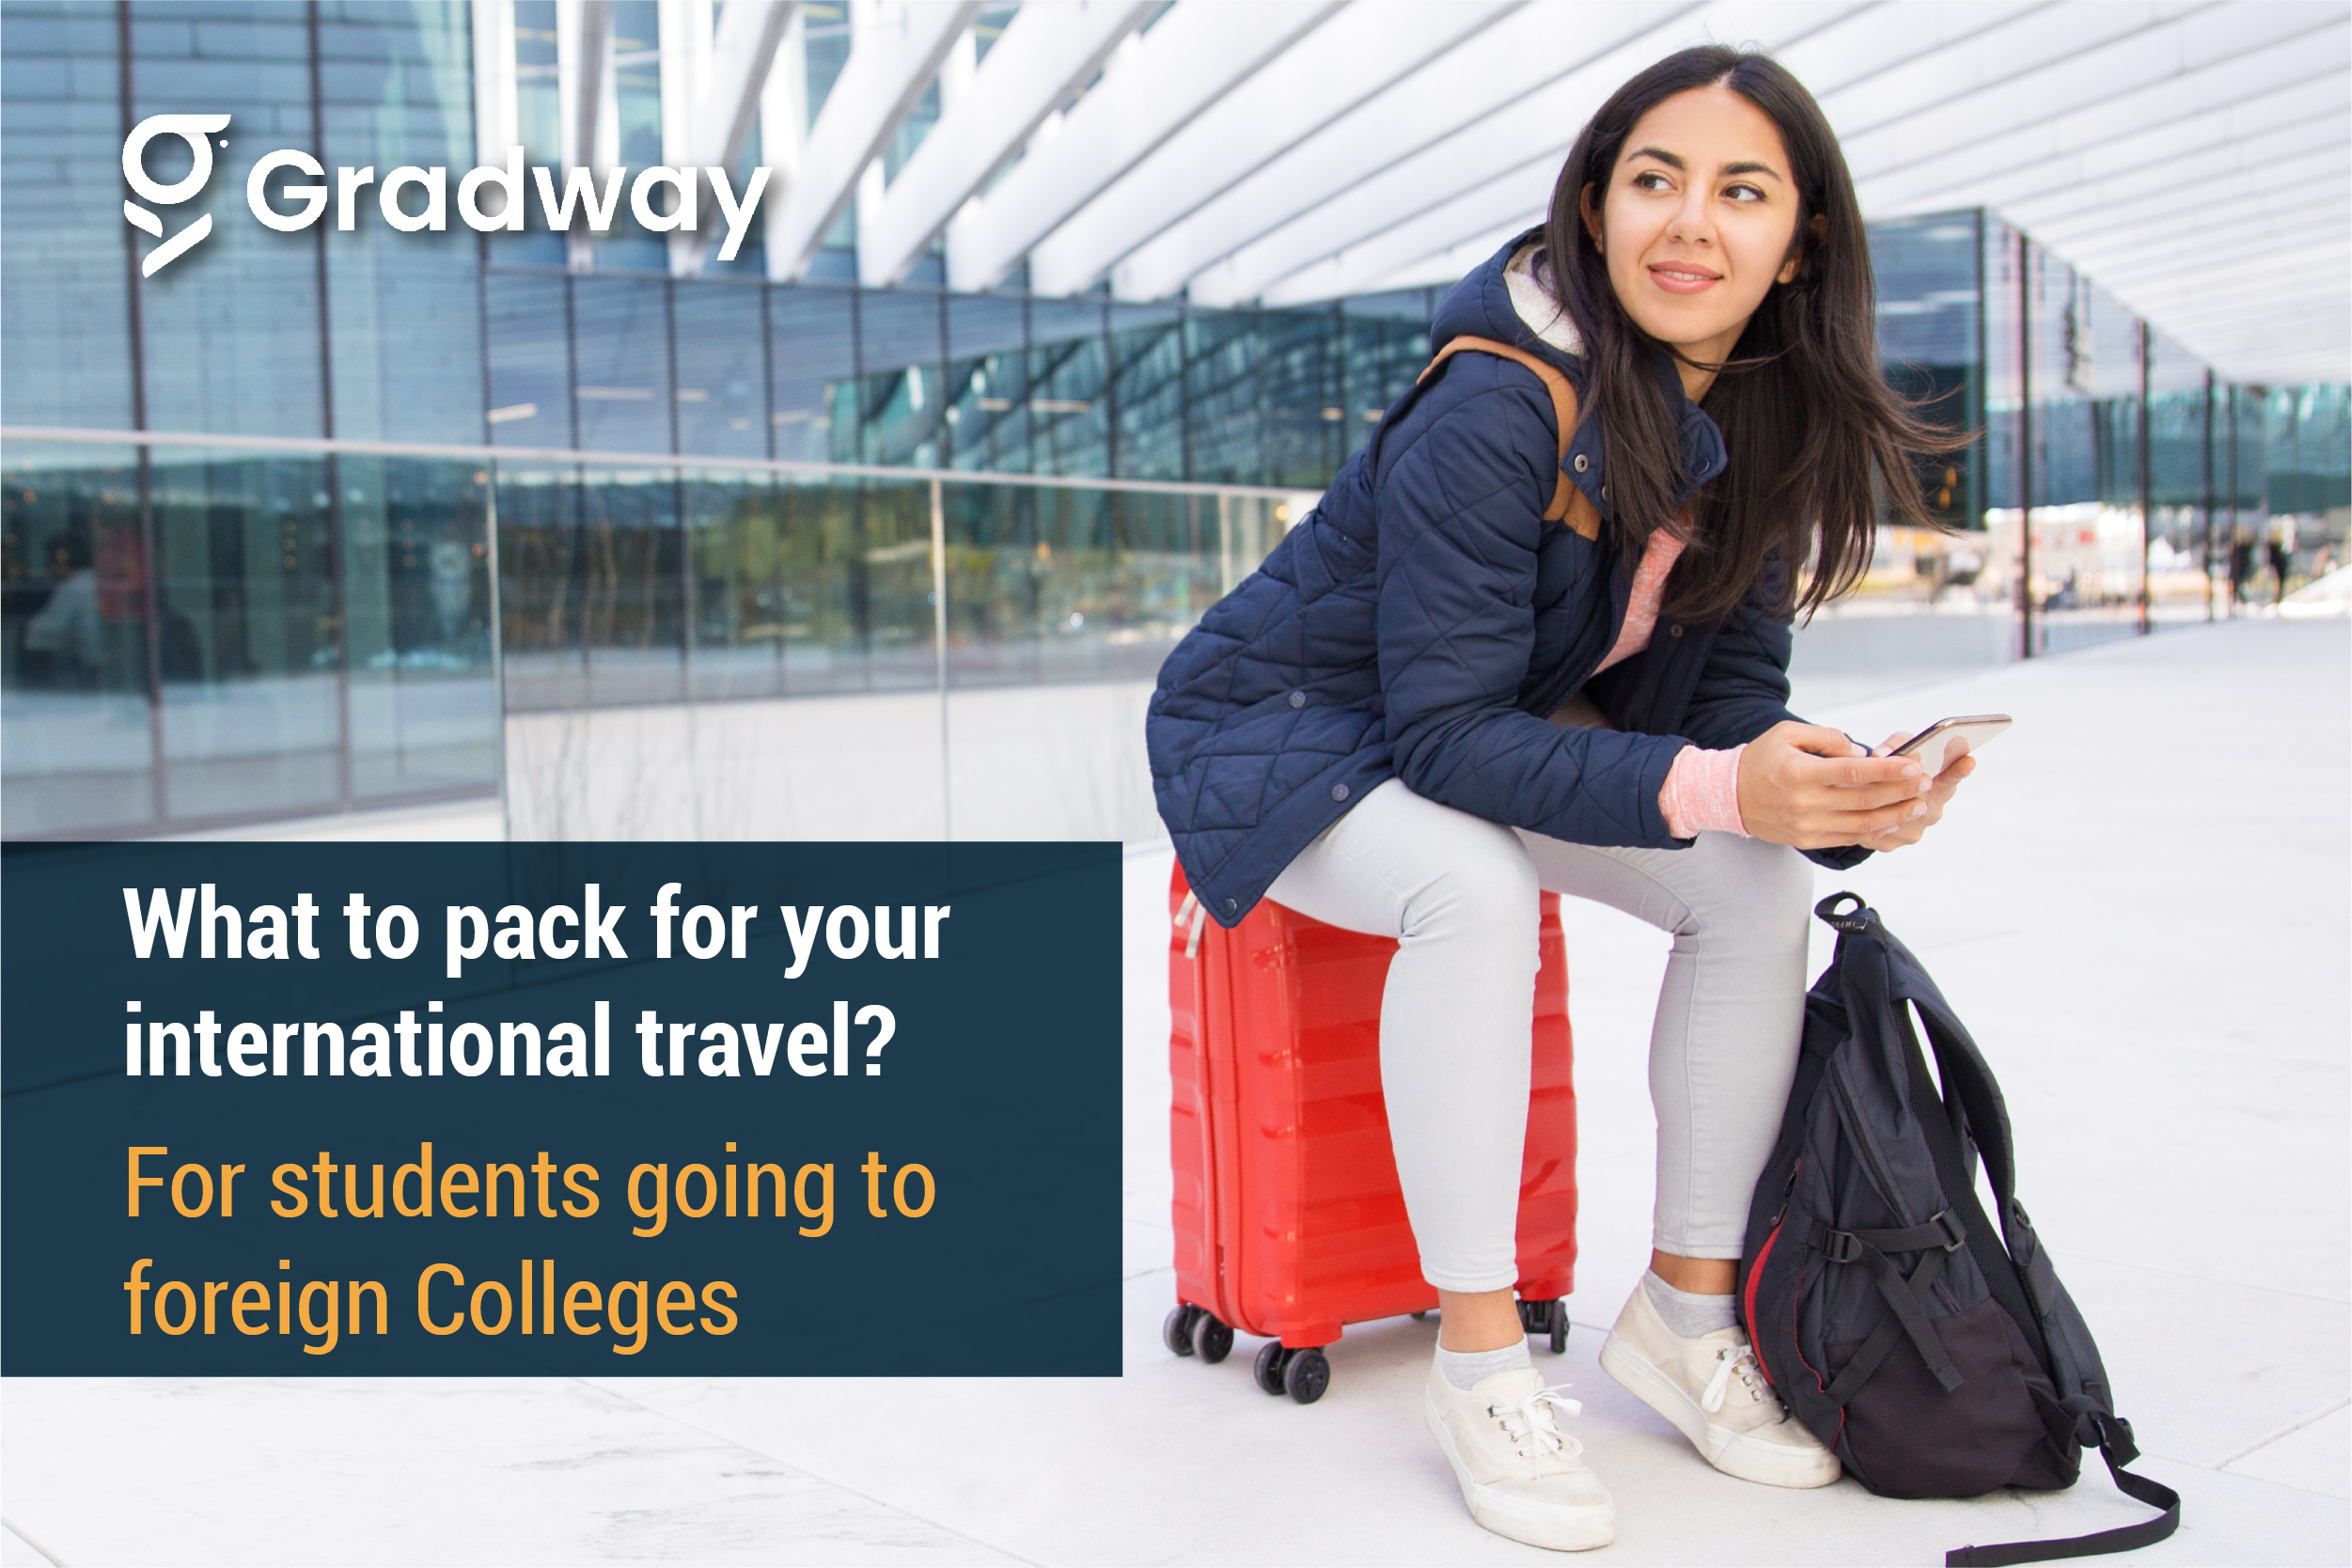 Student Checklist for Study Abroad Travel | Gradway